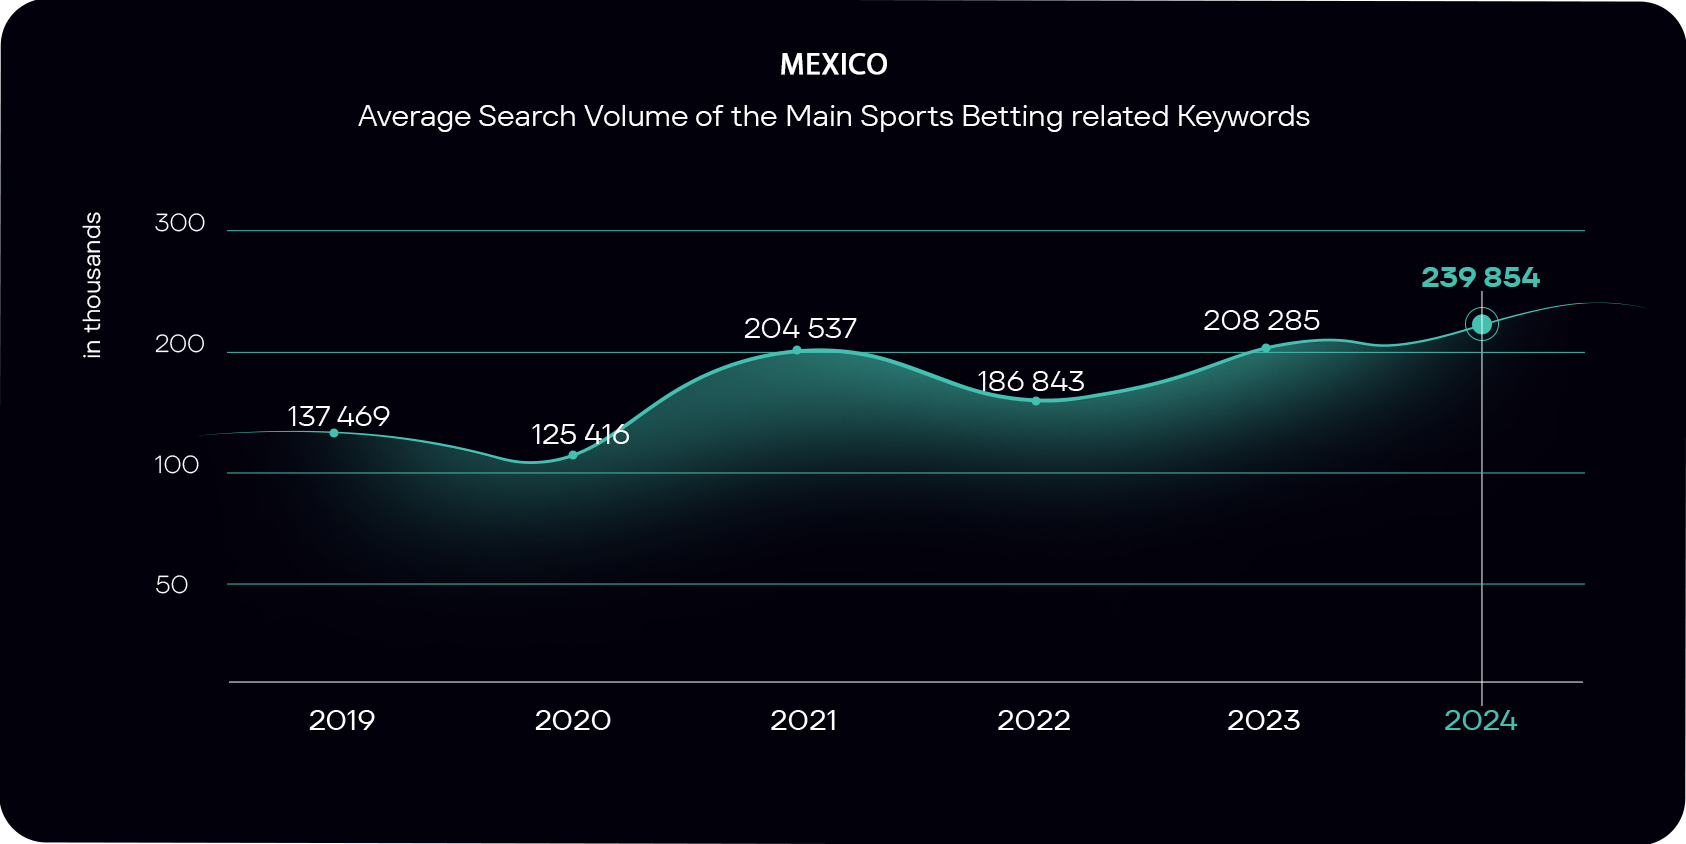 The increase in the usage of main sports betting-related keywords in Mexico